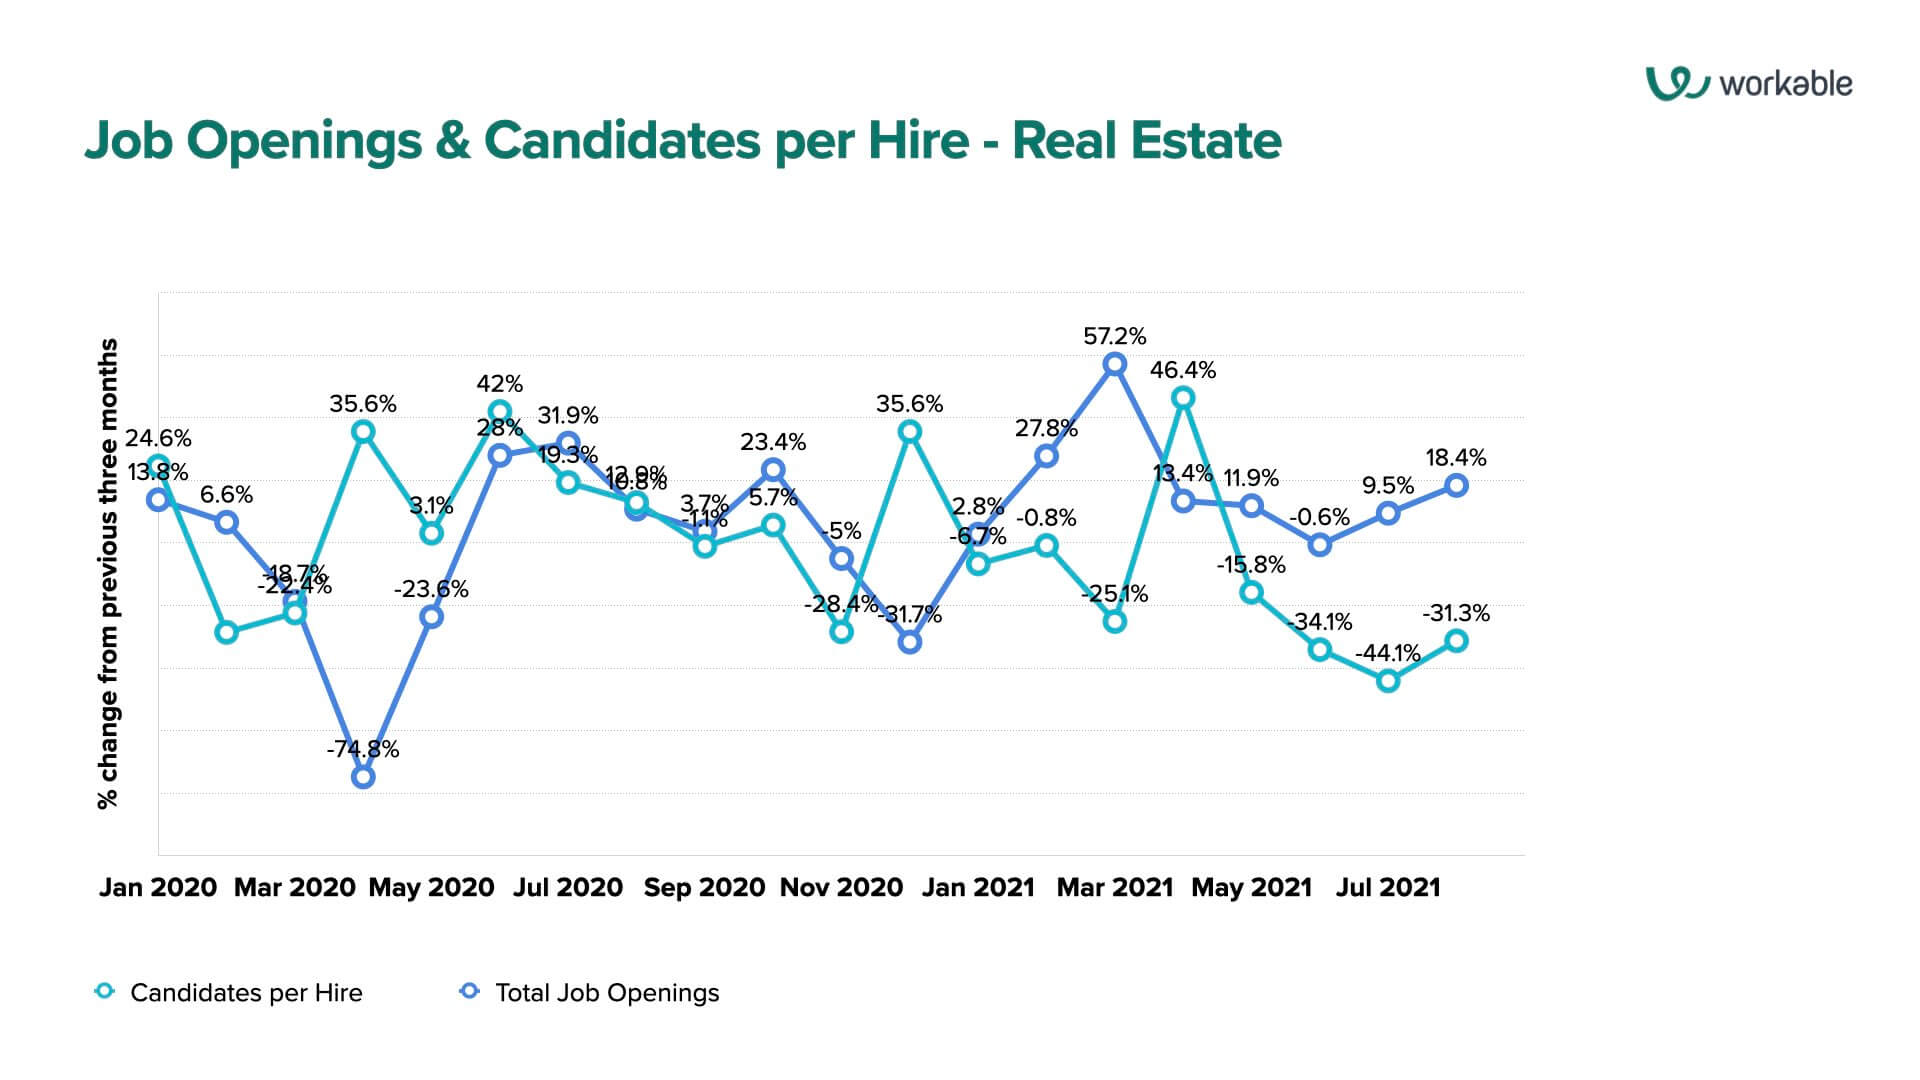 Job Openings & Candidates per Hire - Real Estate